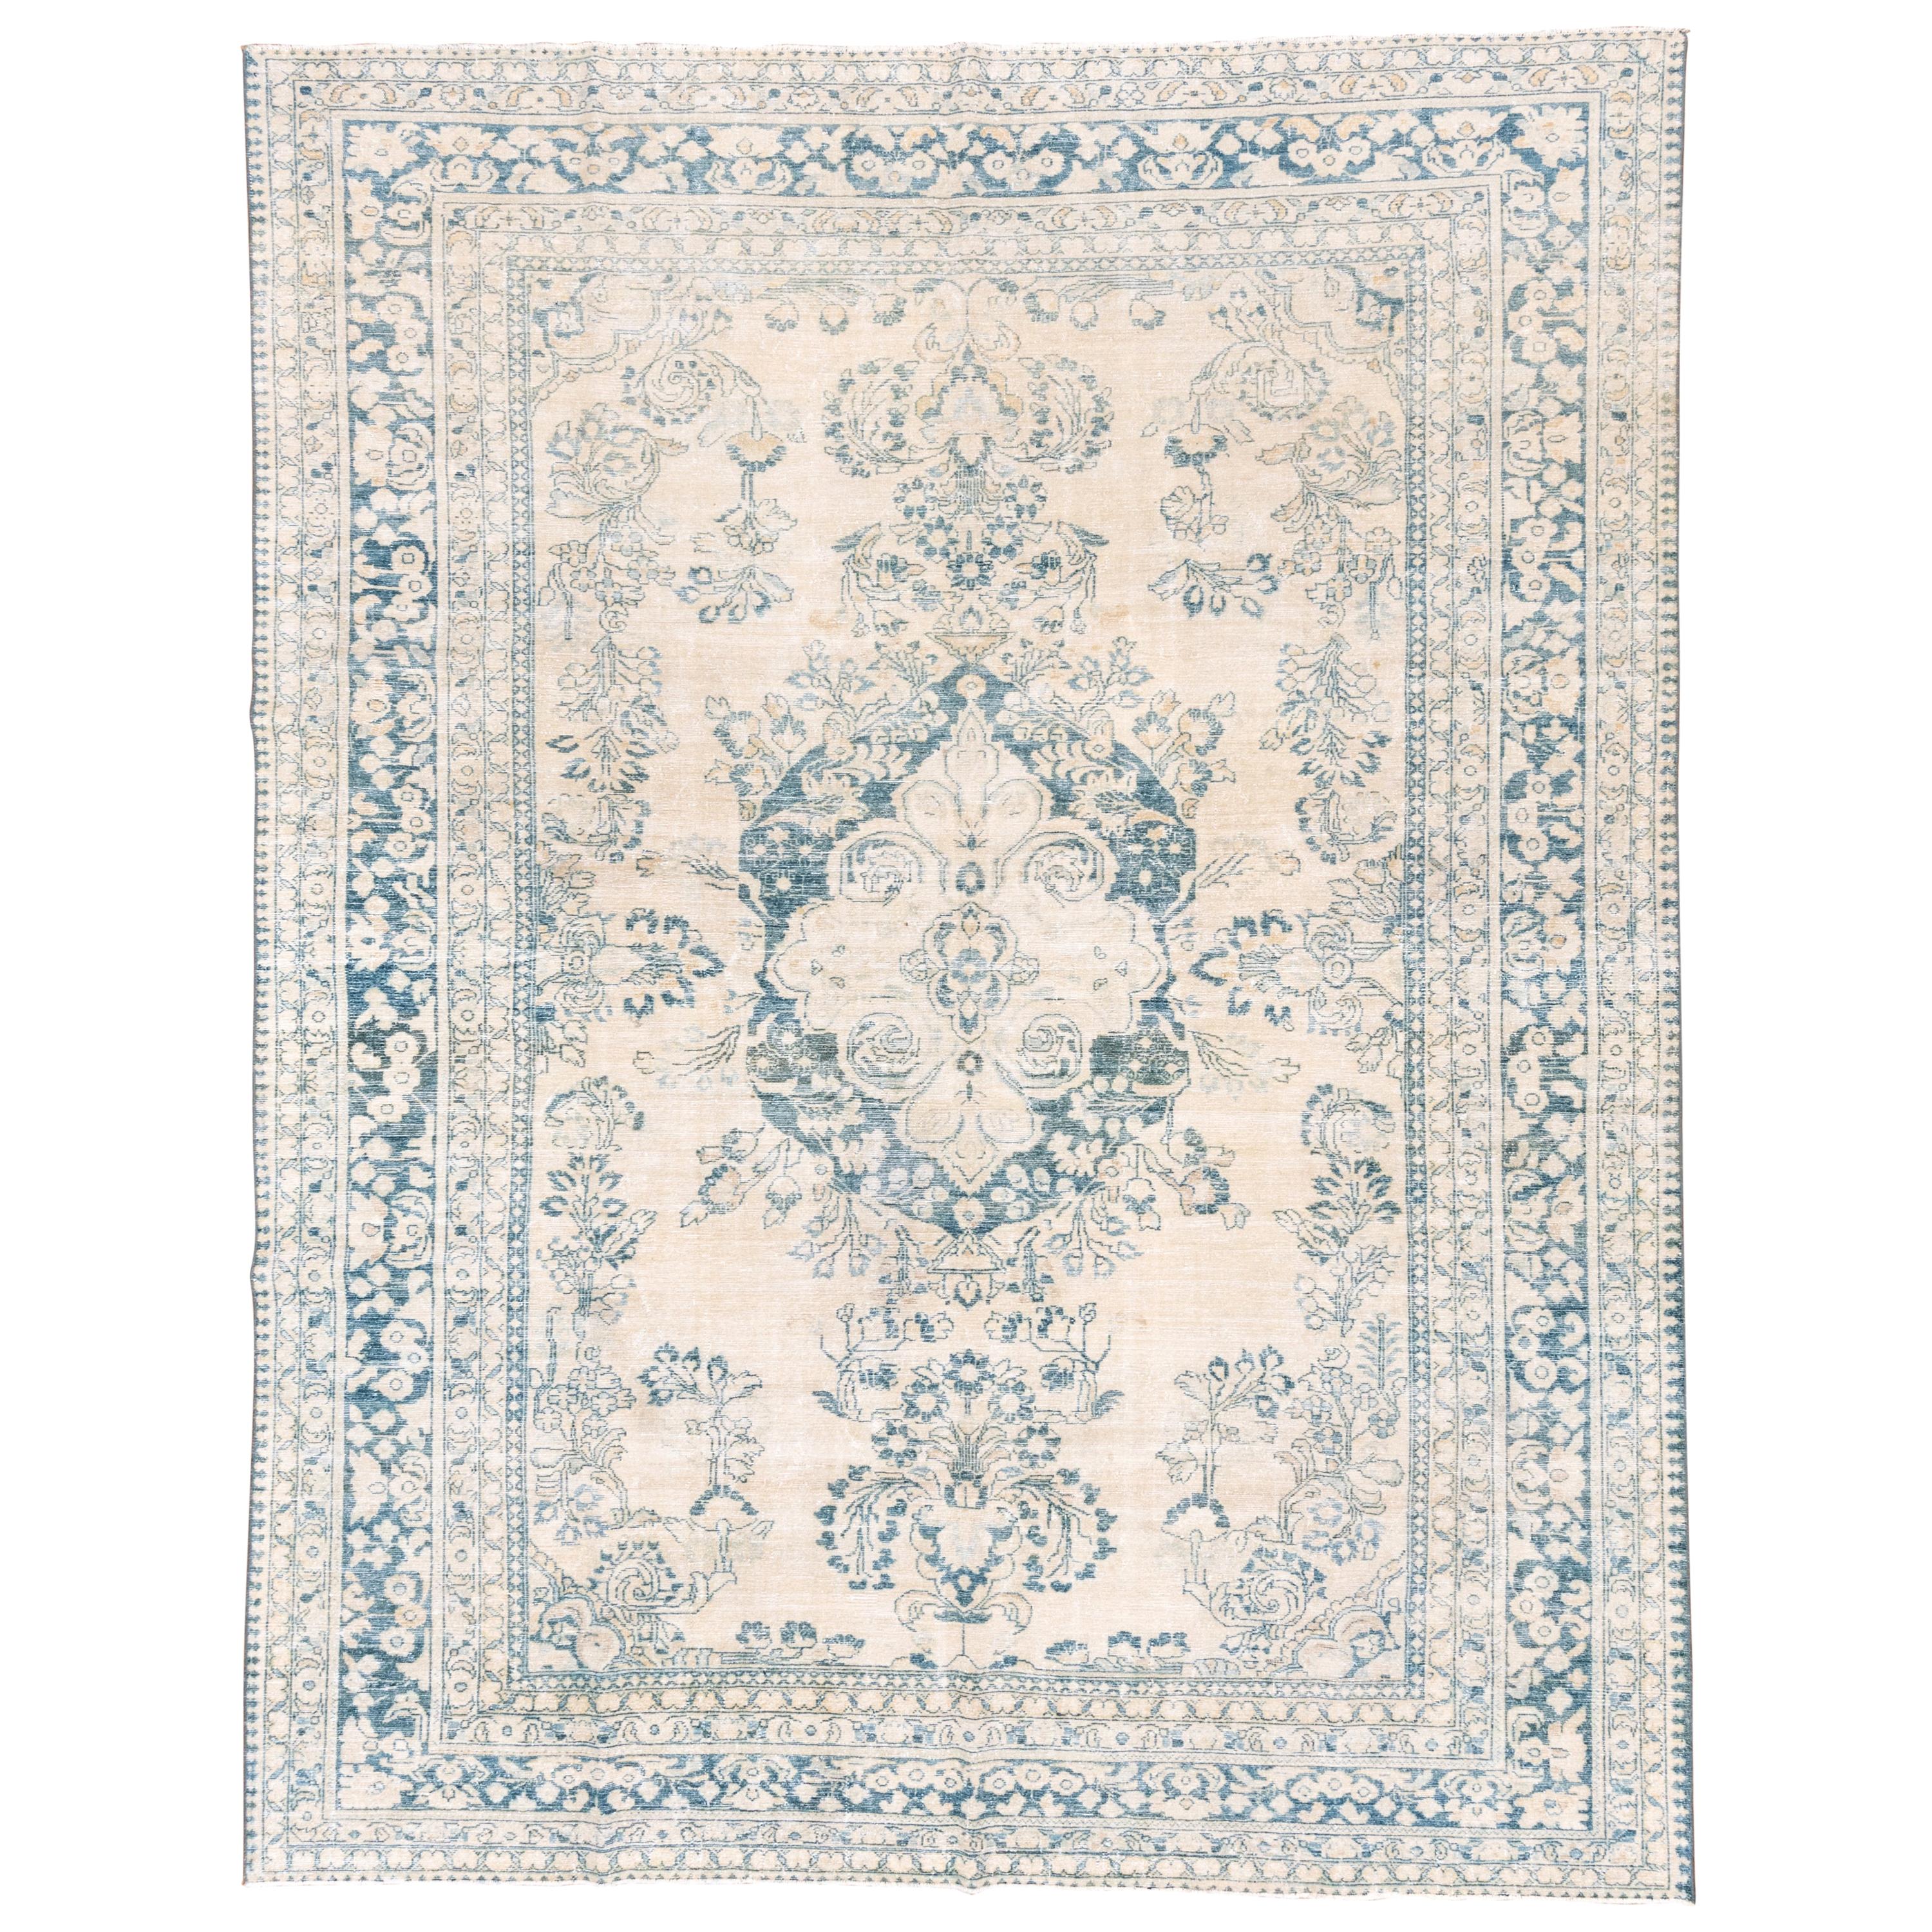 Antique Ivory and Blue Persian Lilian Rug, circa 1930s